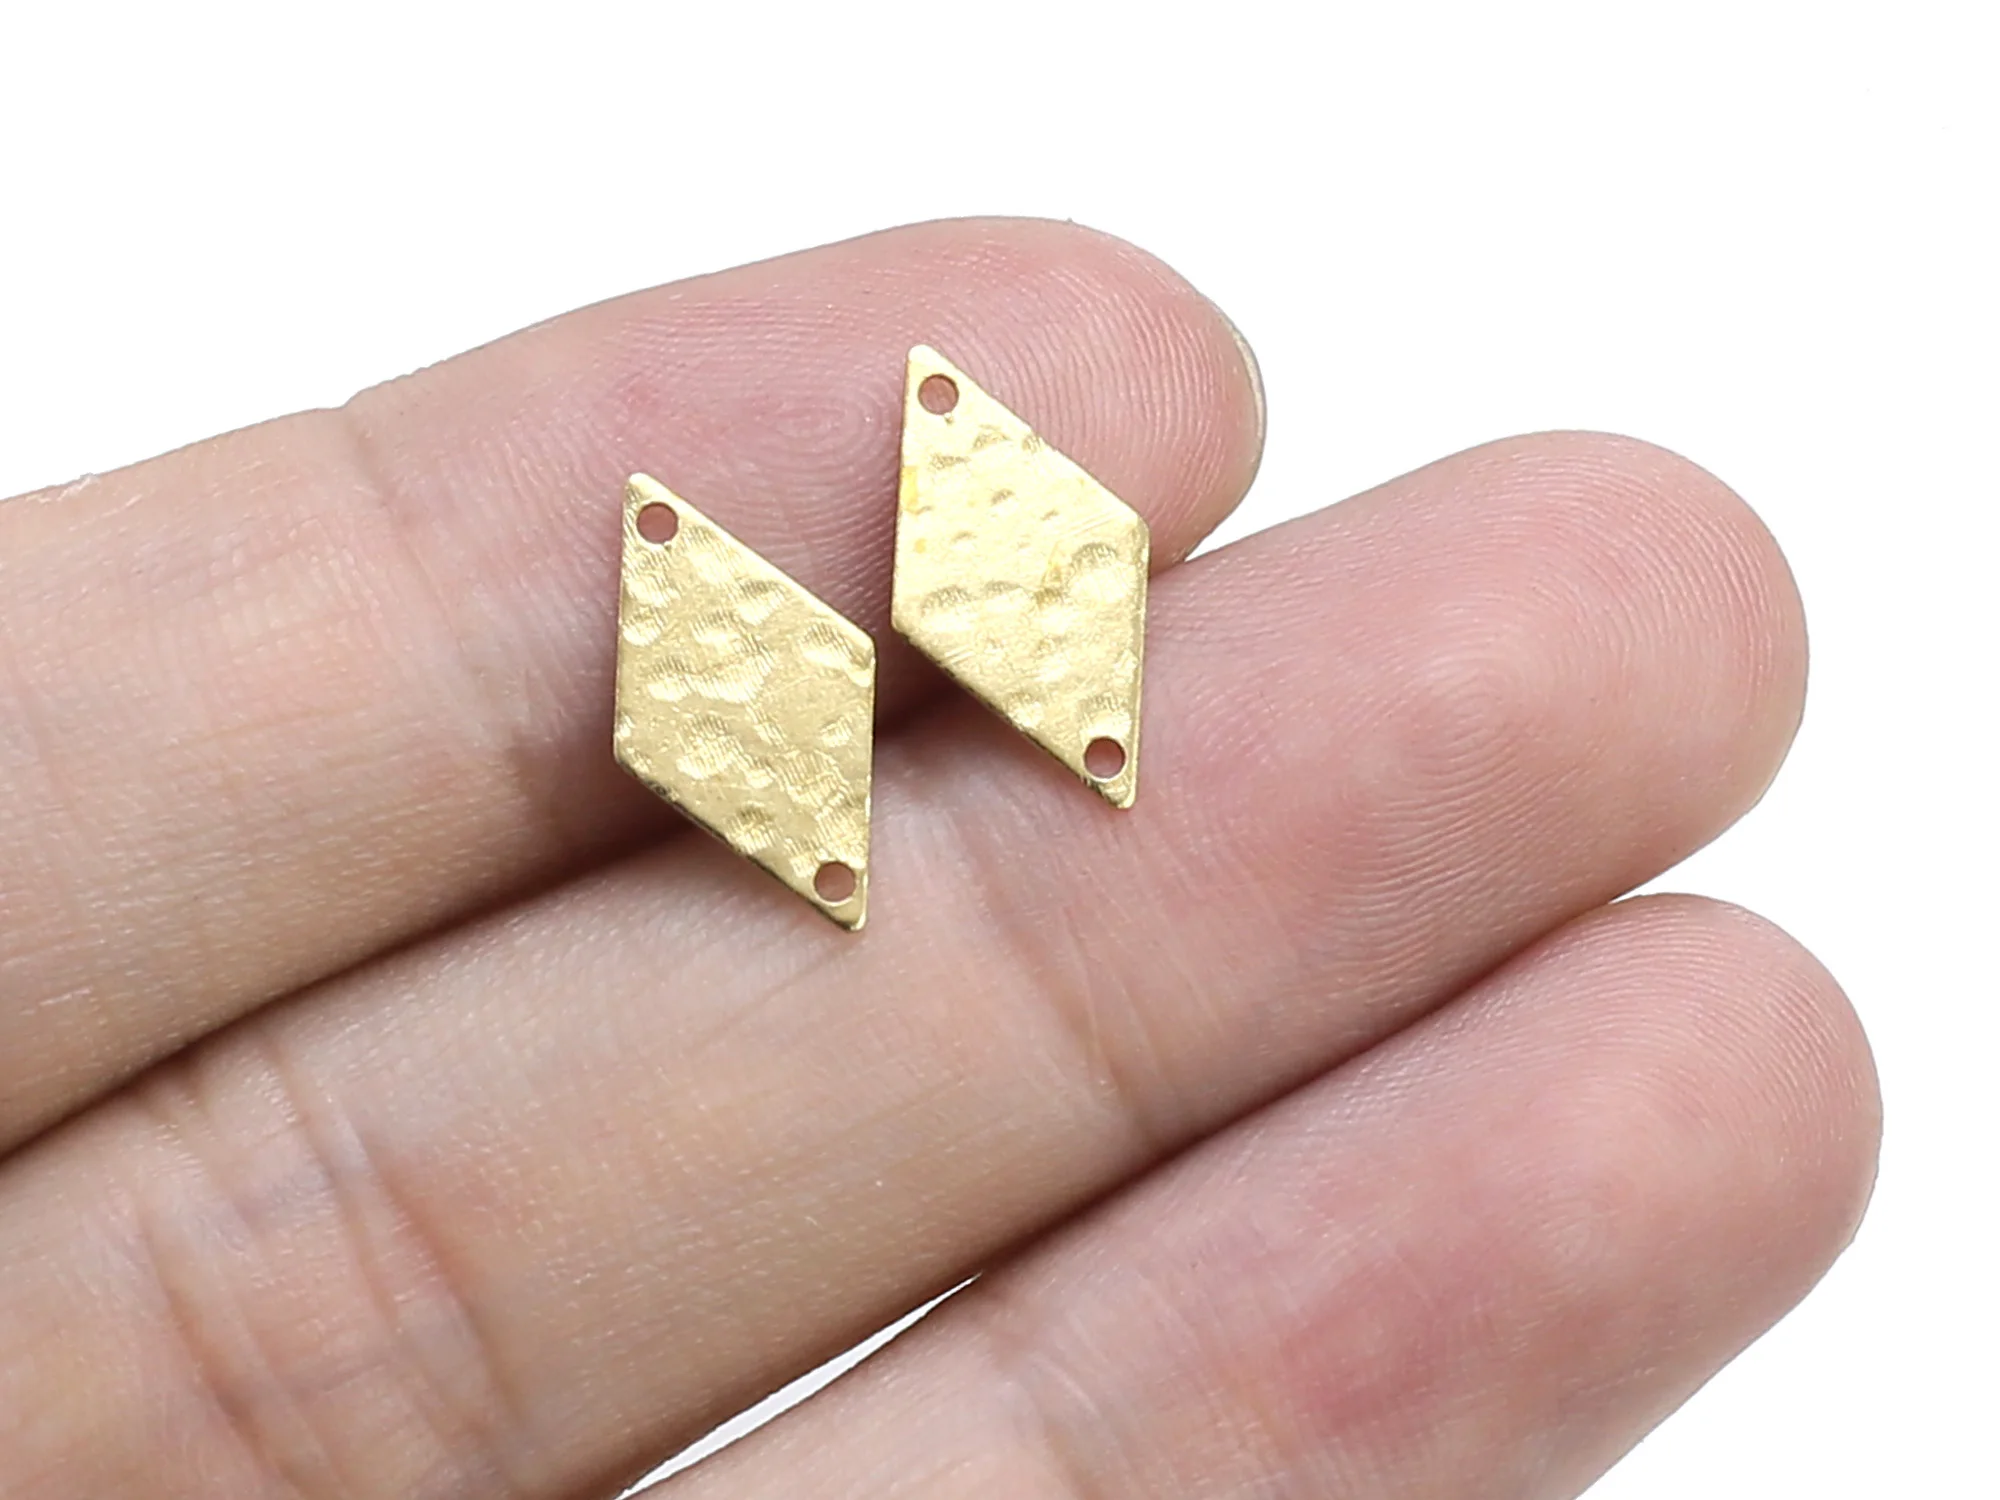 

50pcs Brass Charms, Rhombus Earring Connector, Brass Findings, 15x8.3x0.6mm, Earring Charms For Jewelry Making - R1492